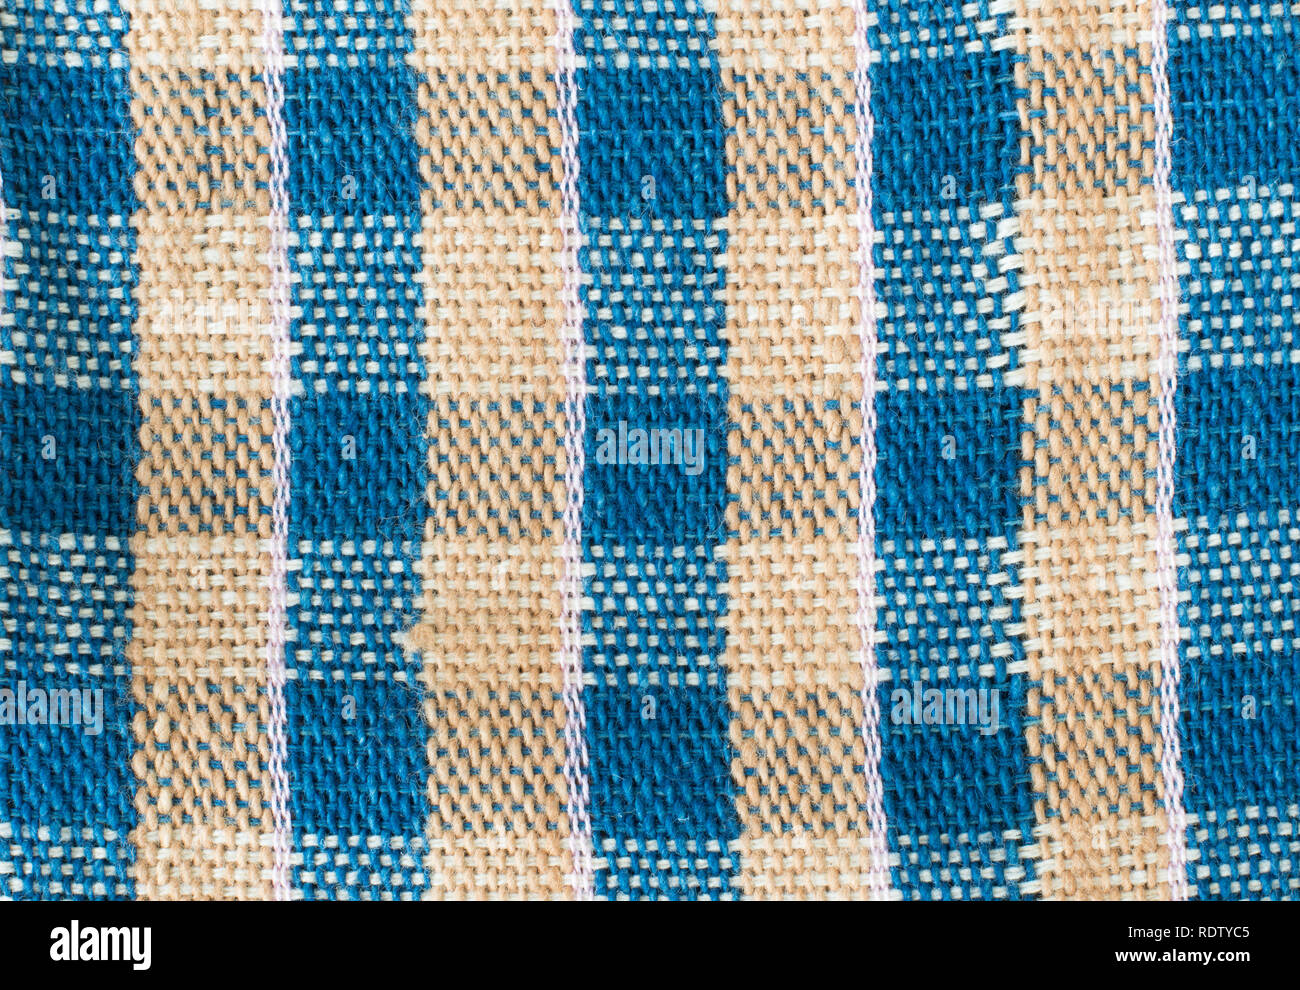 Handmade cotton woven fabric as a background and texture Stock Photo